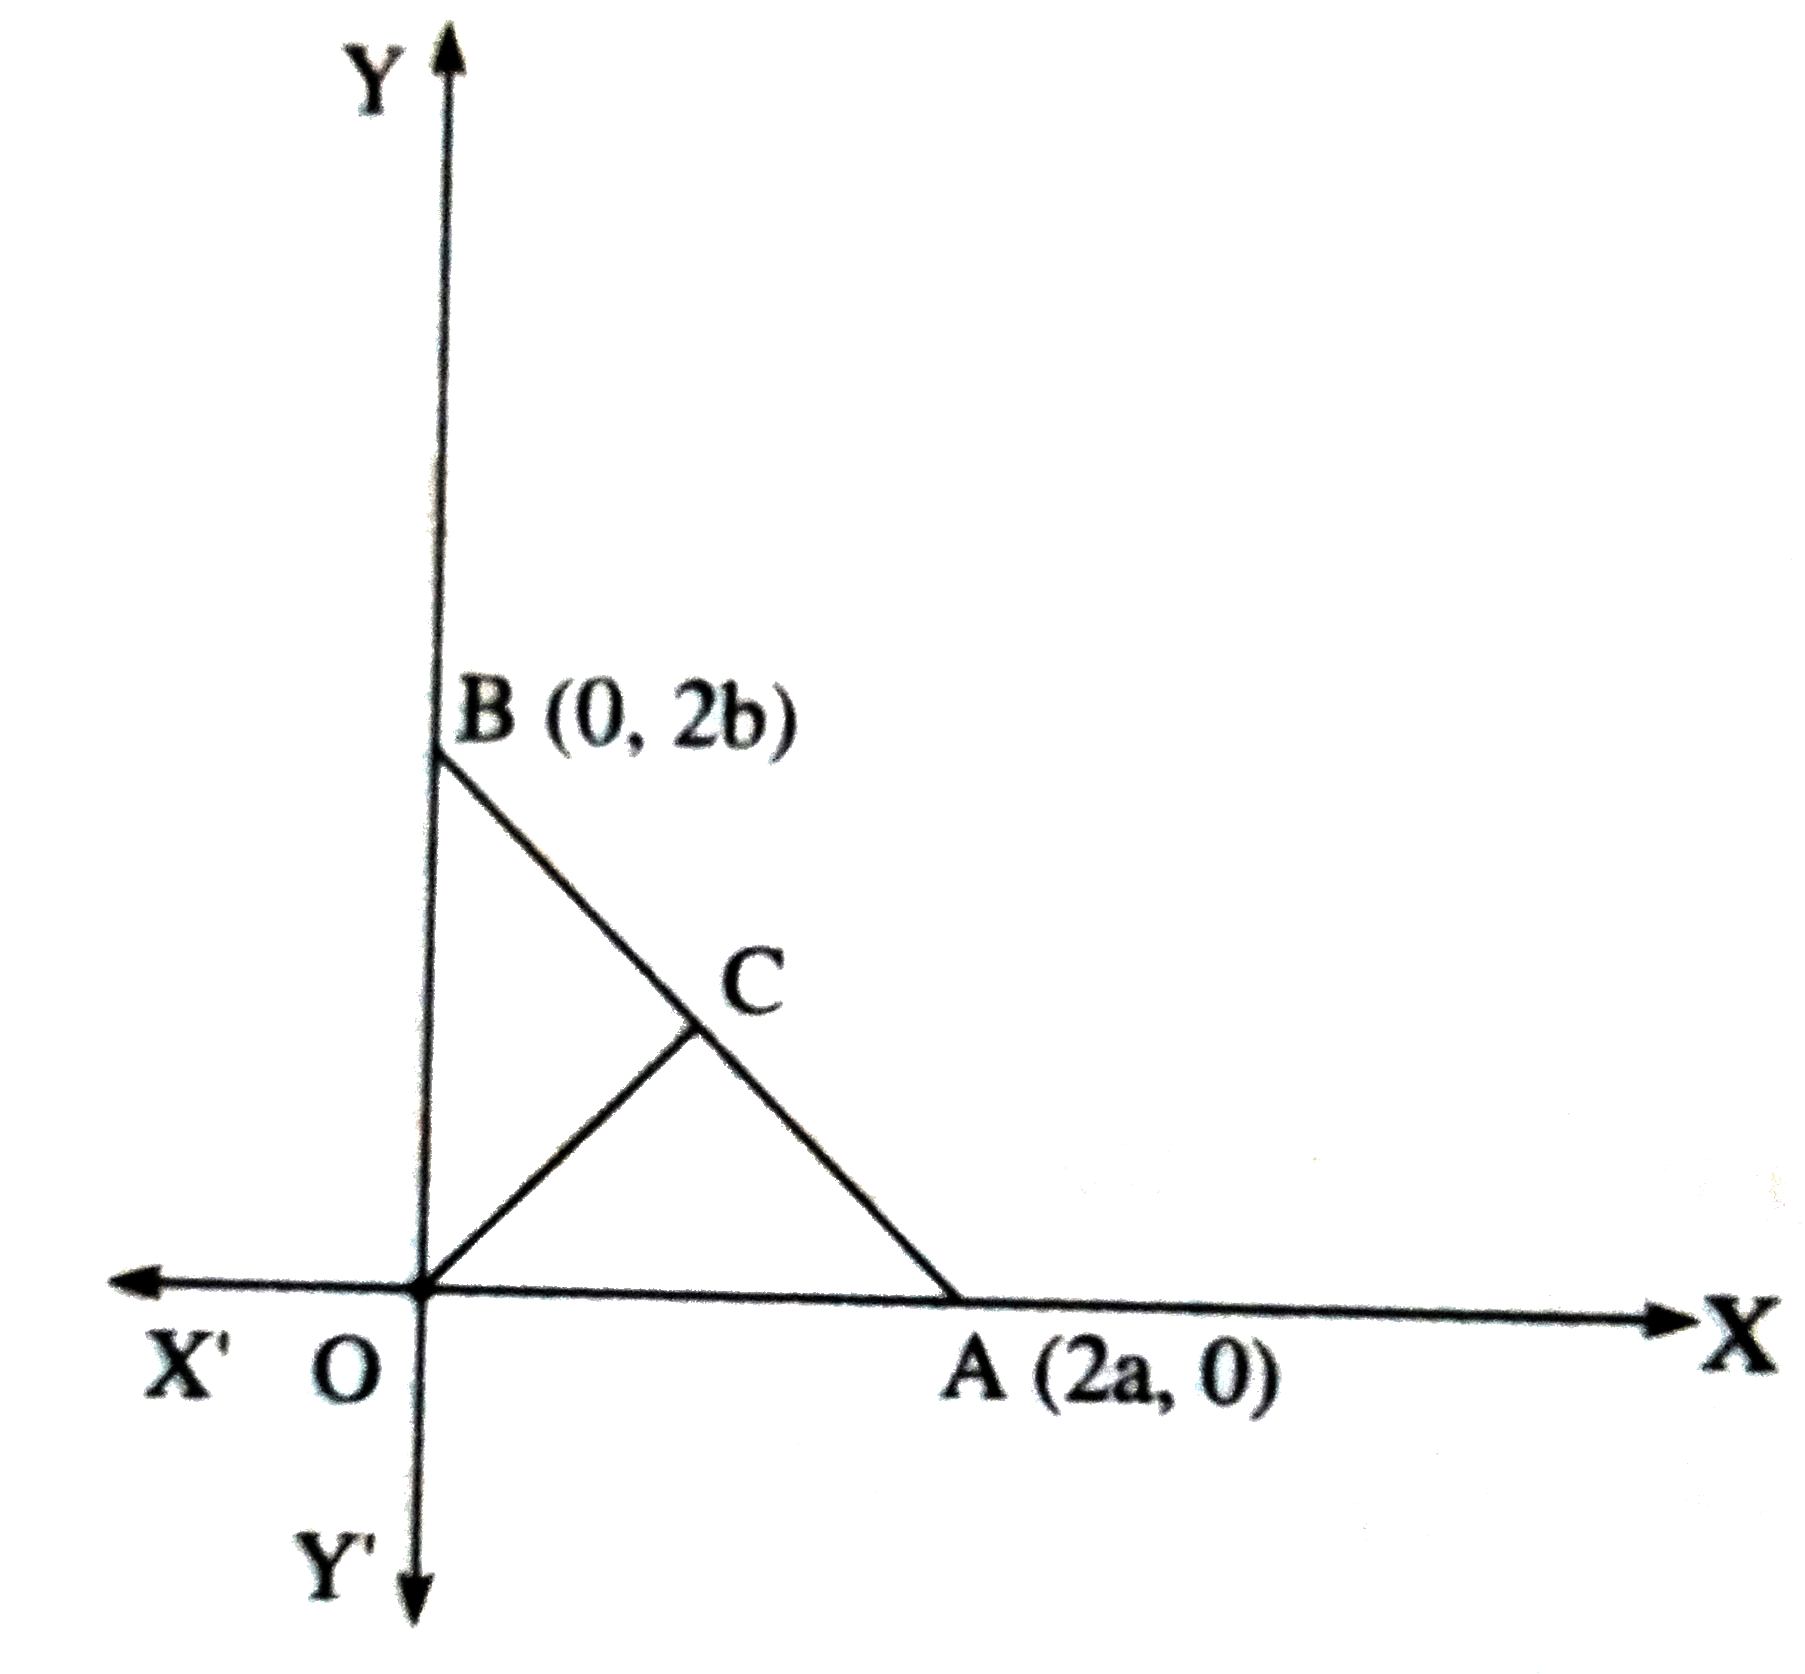 In the figure, point B(0,2b) lies on Y-axis and A(2a,0) lies on X-axis. C is the midpoint of AB. Find the coordinates of C and hence using distance formula. Show C is  equidistant from points B,O and A.